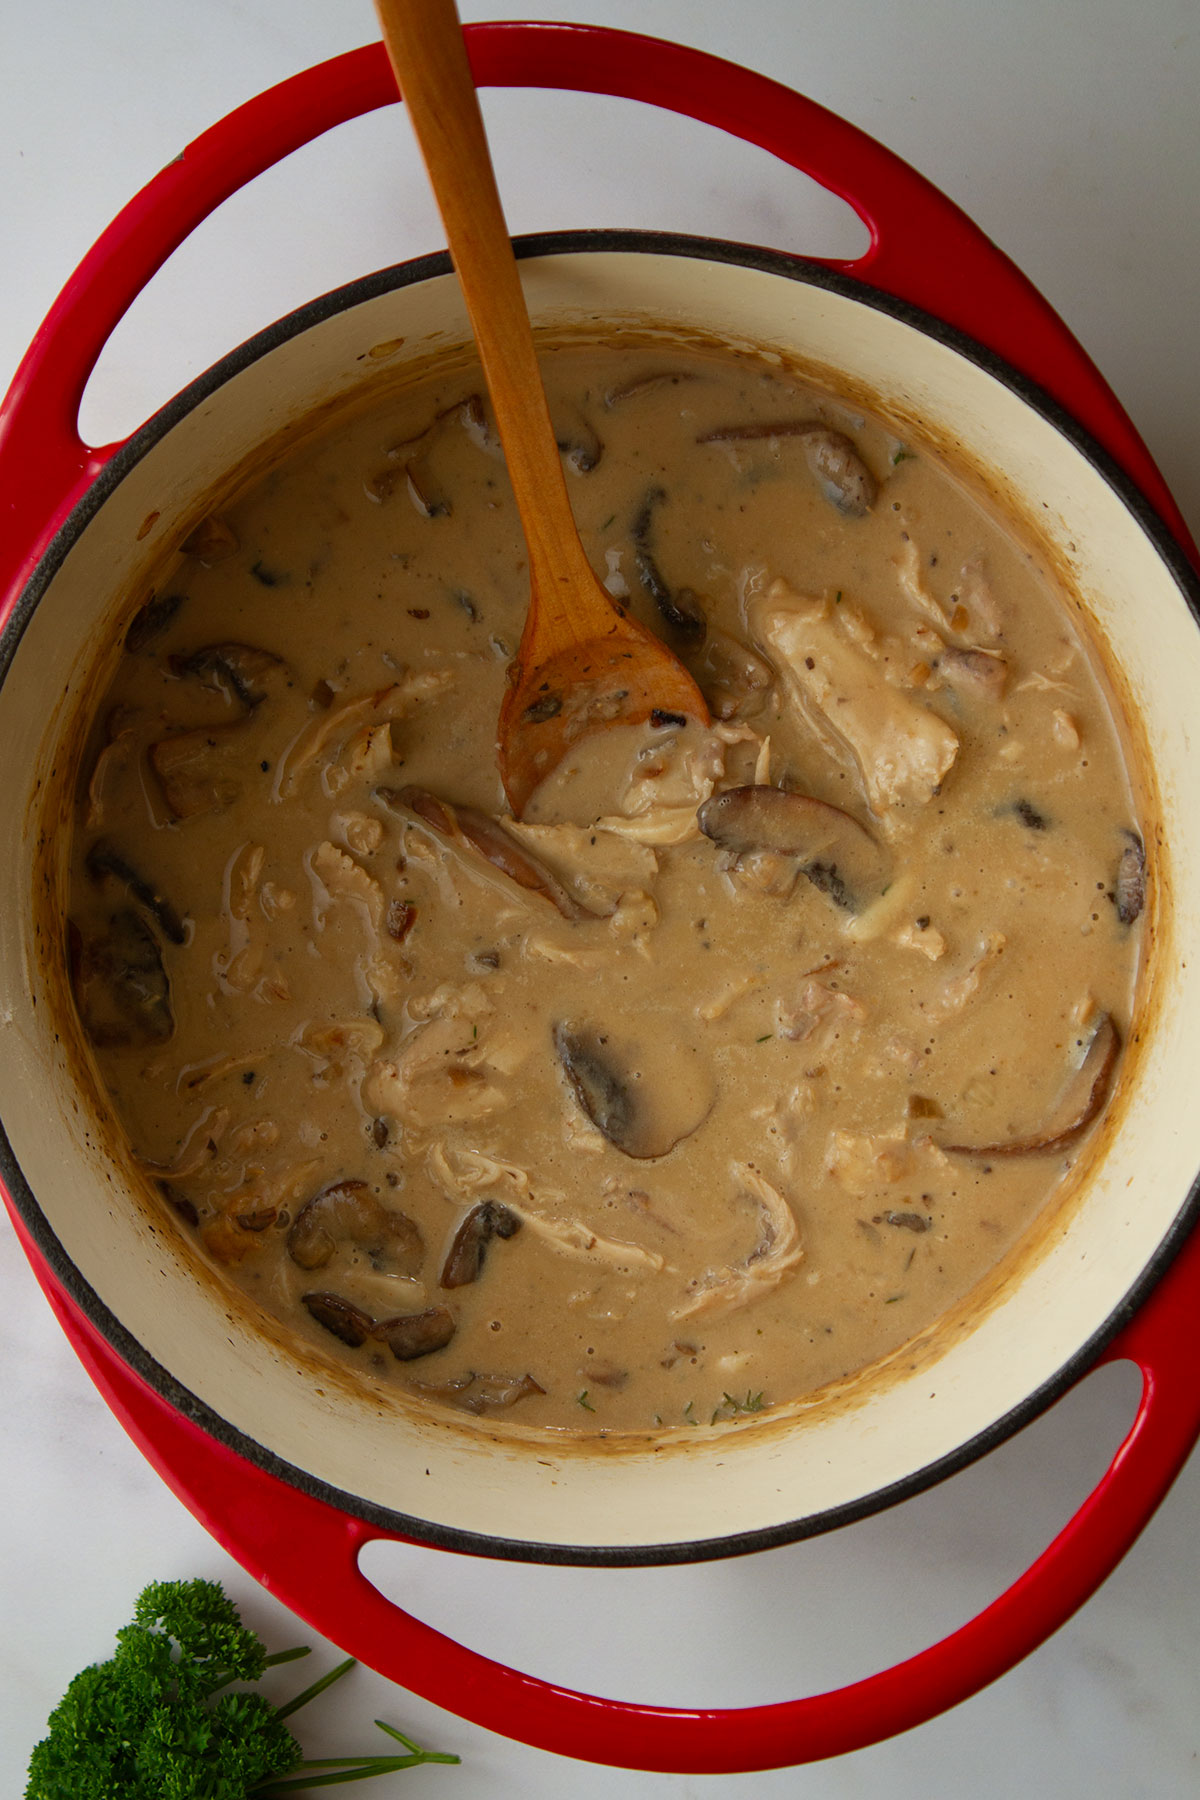 A dutch oven with cream and cooked turkey added.